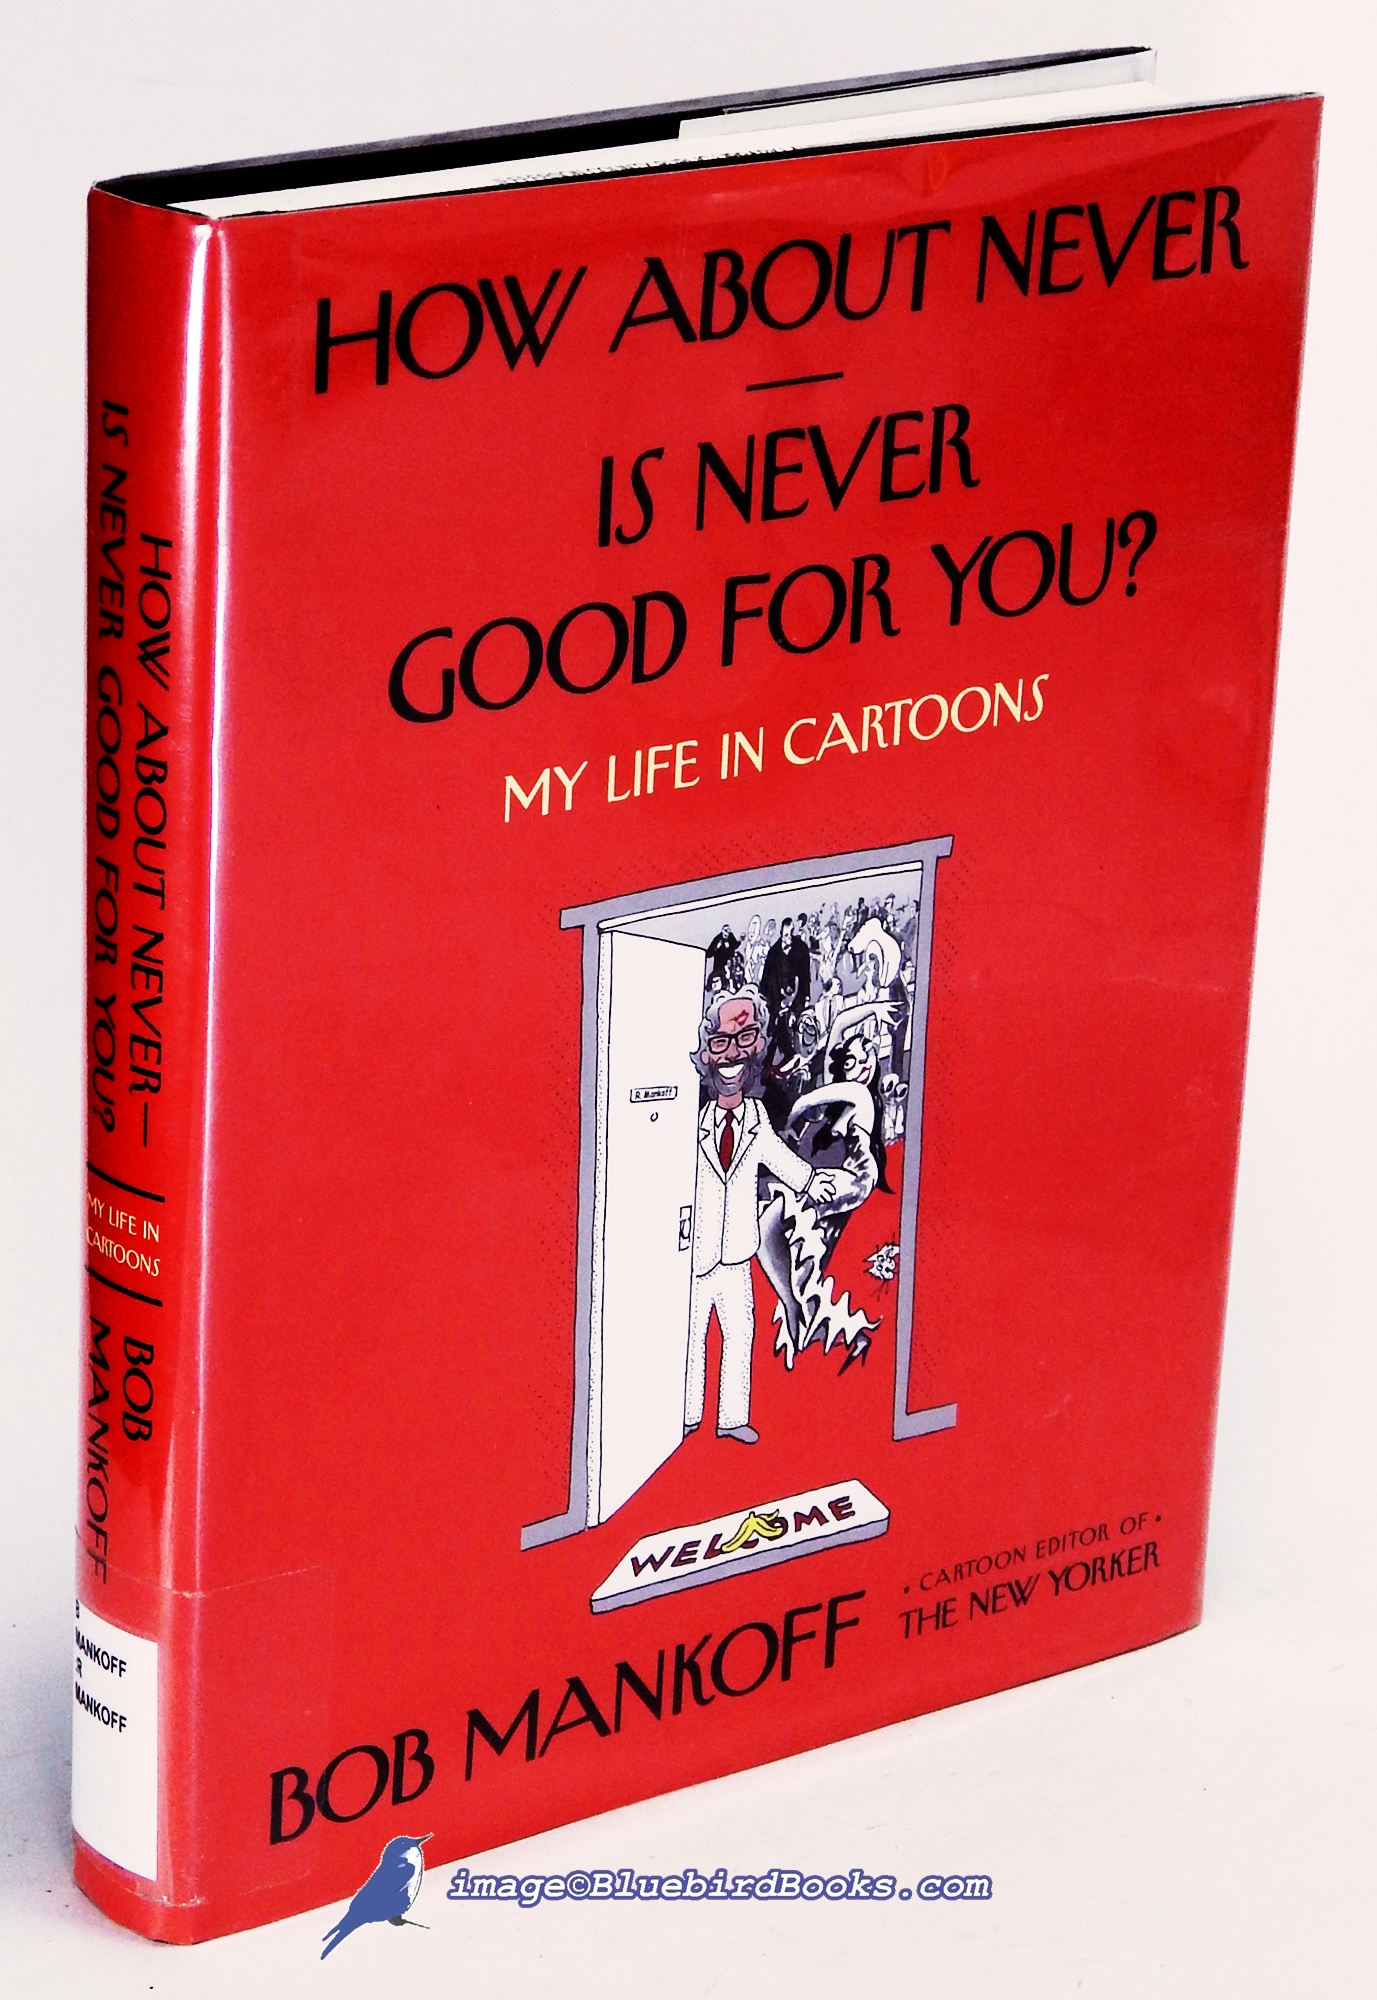 MANKOFF, BOB - How About Never -- Is Never Good for You?: My Life in Cartoons